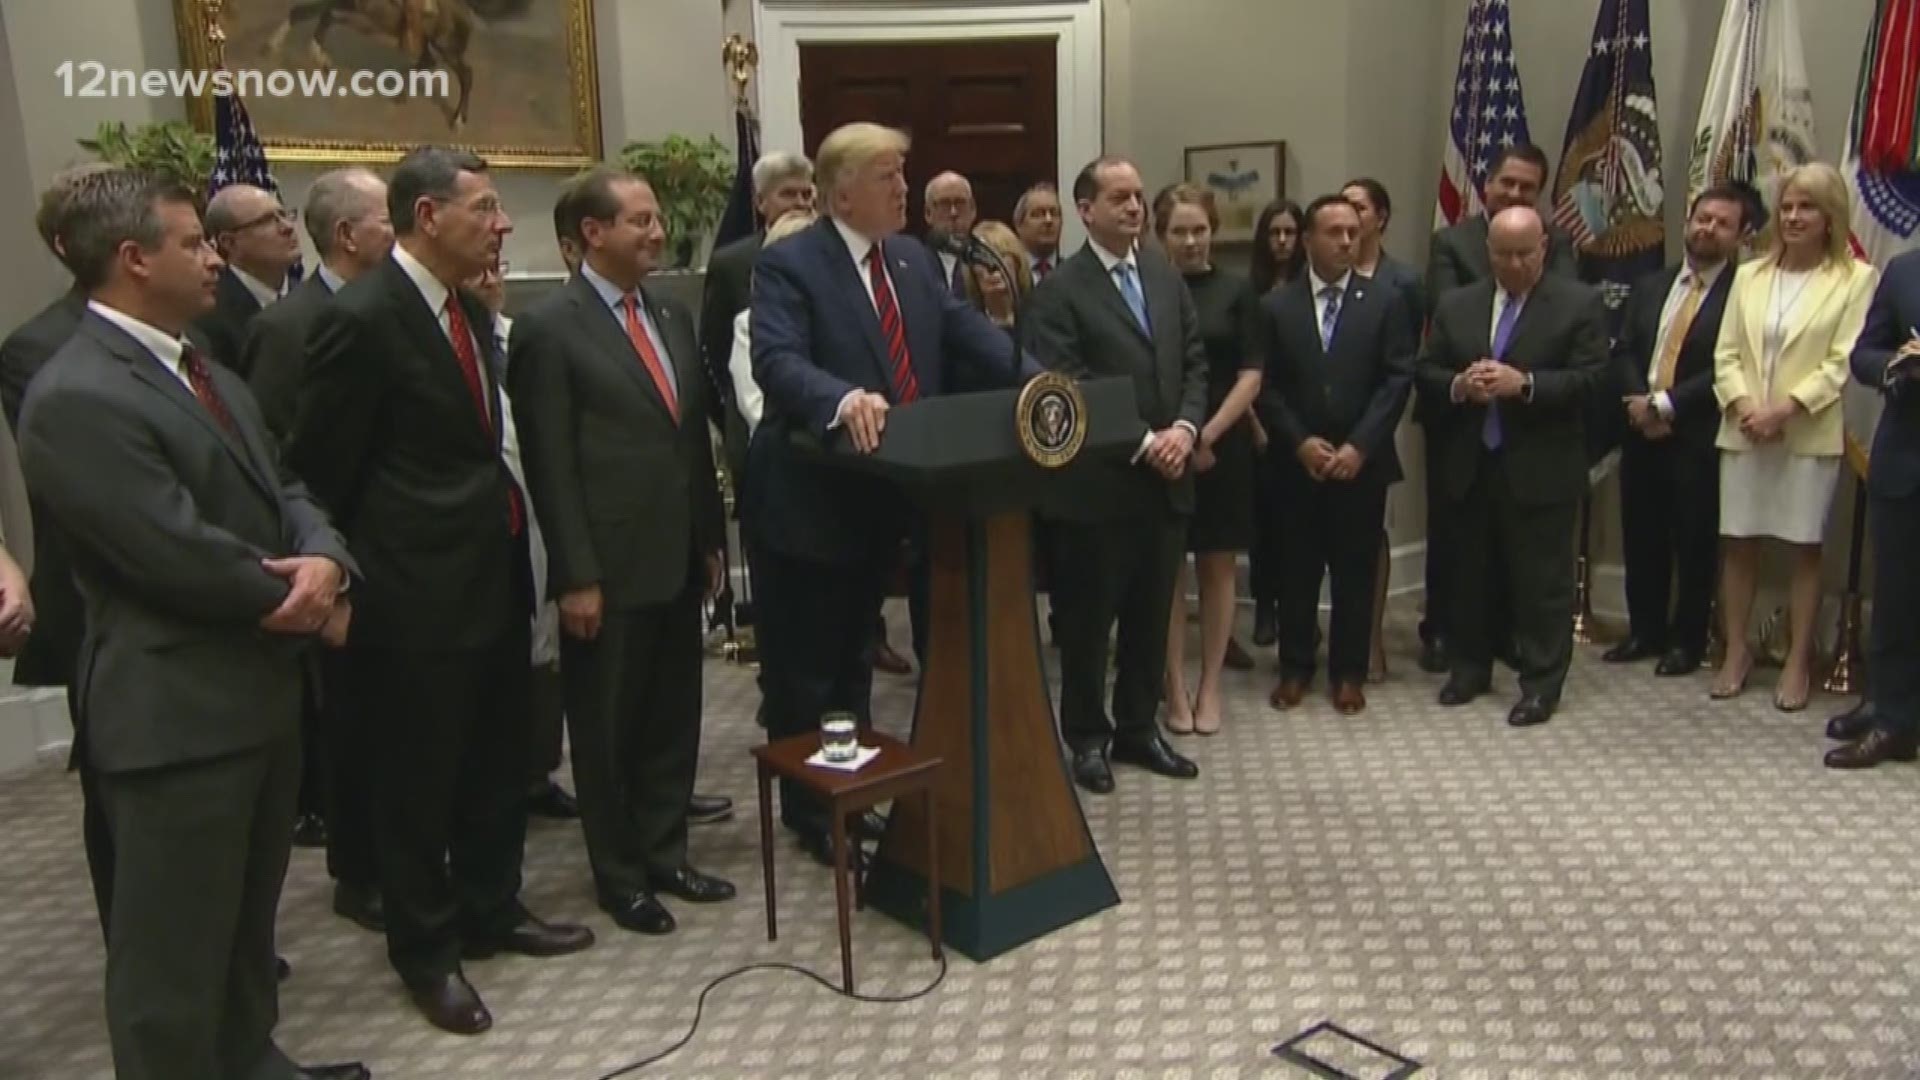 President Trump says he hopes that the US and Iran can avoid war. However, House speaker Nancy Pelosi has noted that Congress is the only group allowed to declare war. The question now is whether they will use that power -- Craig Boswell reports from Washington.